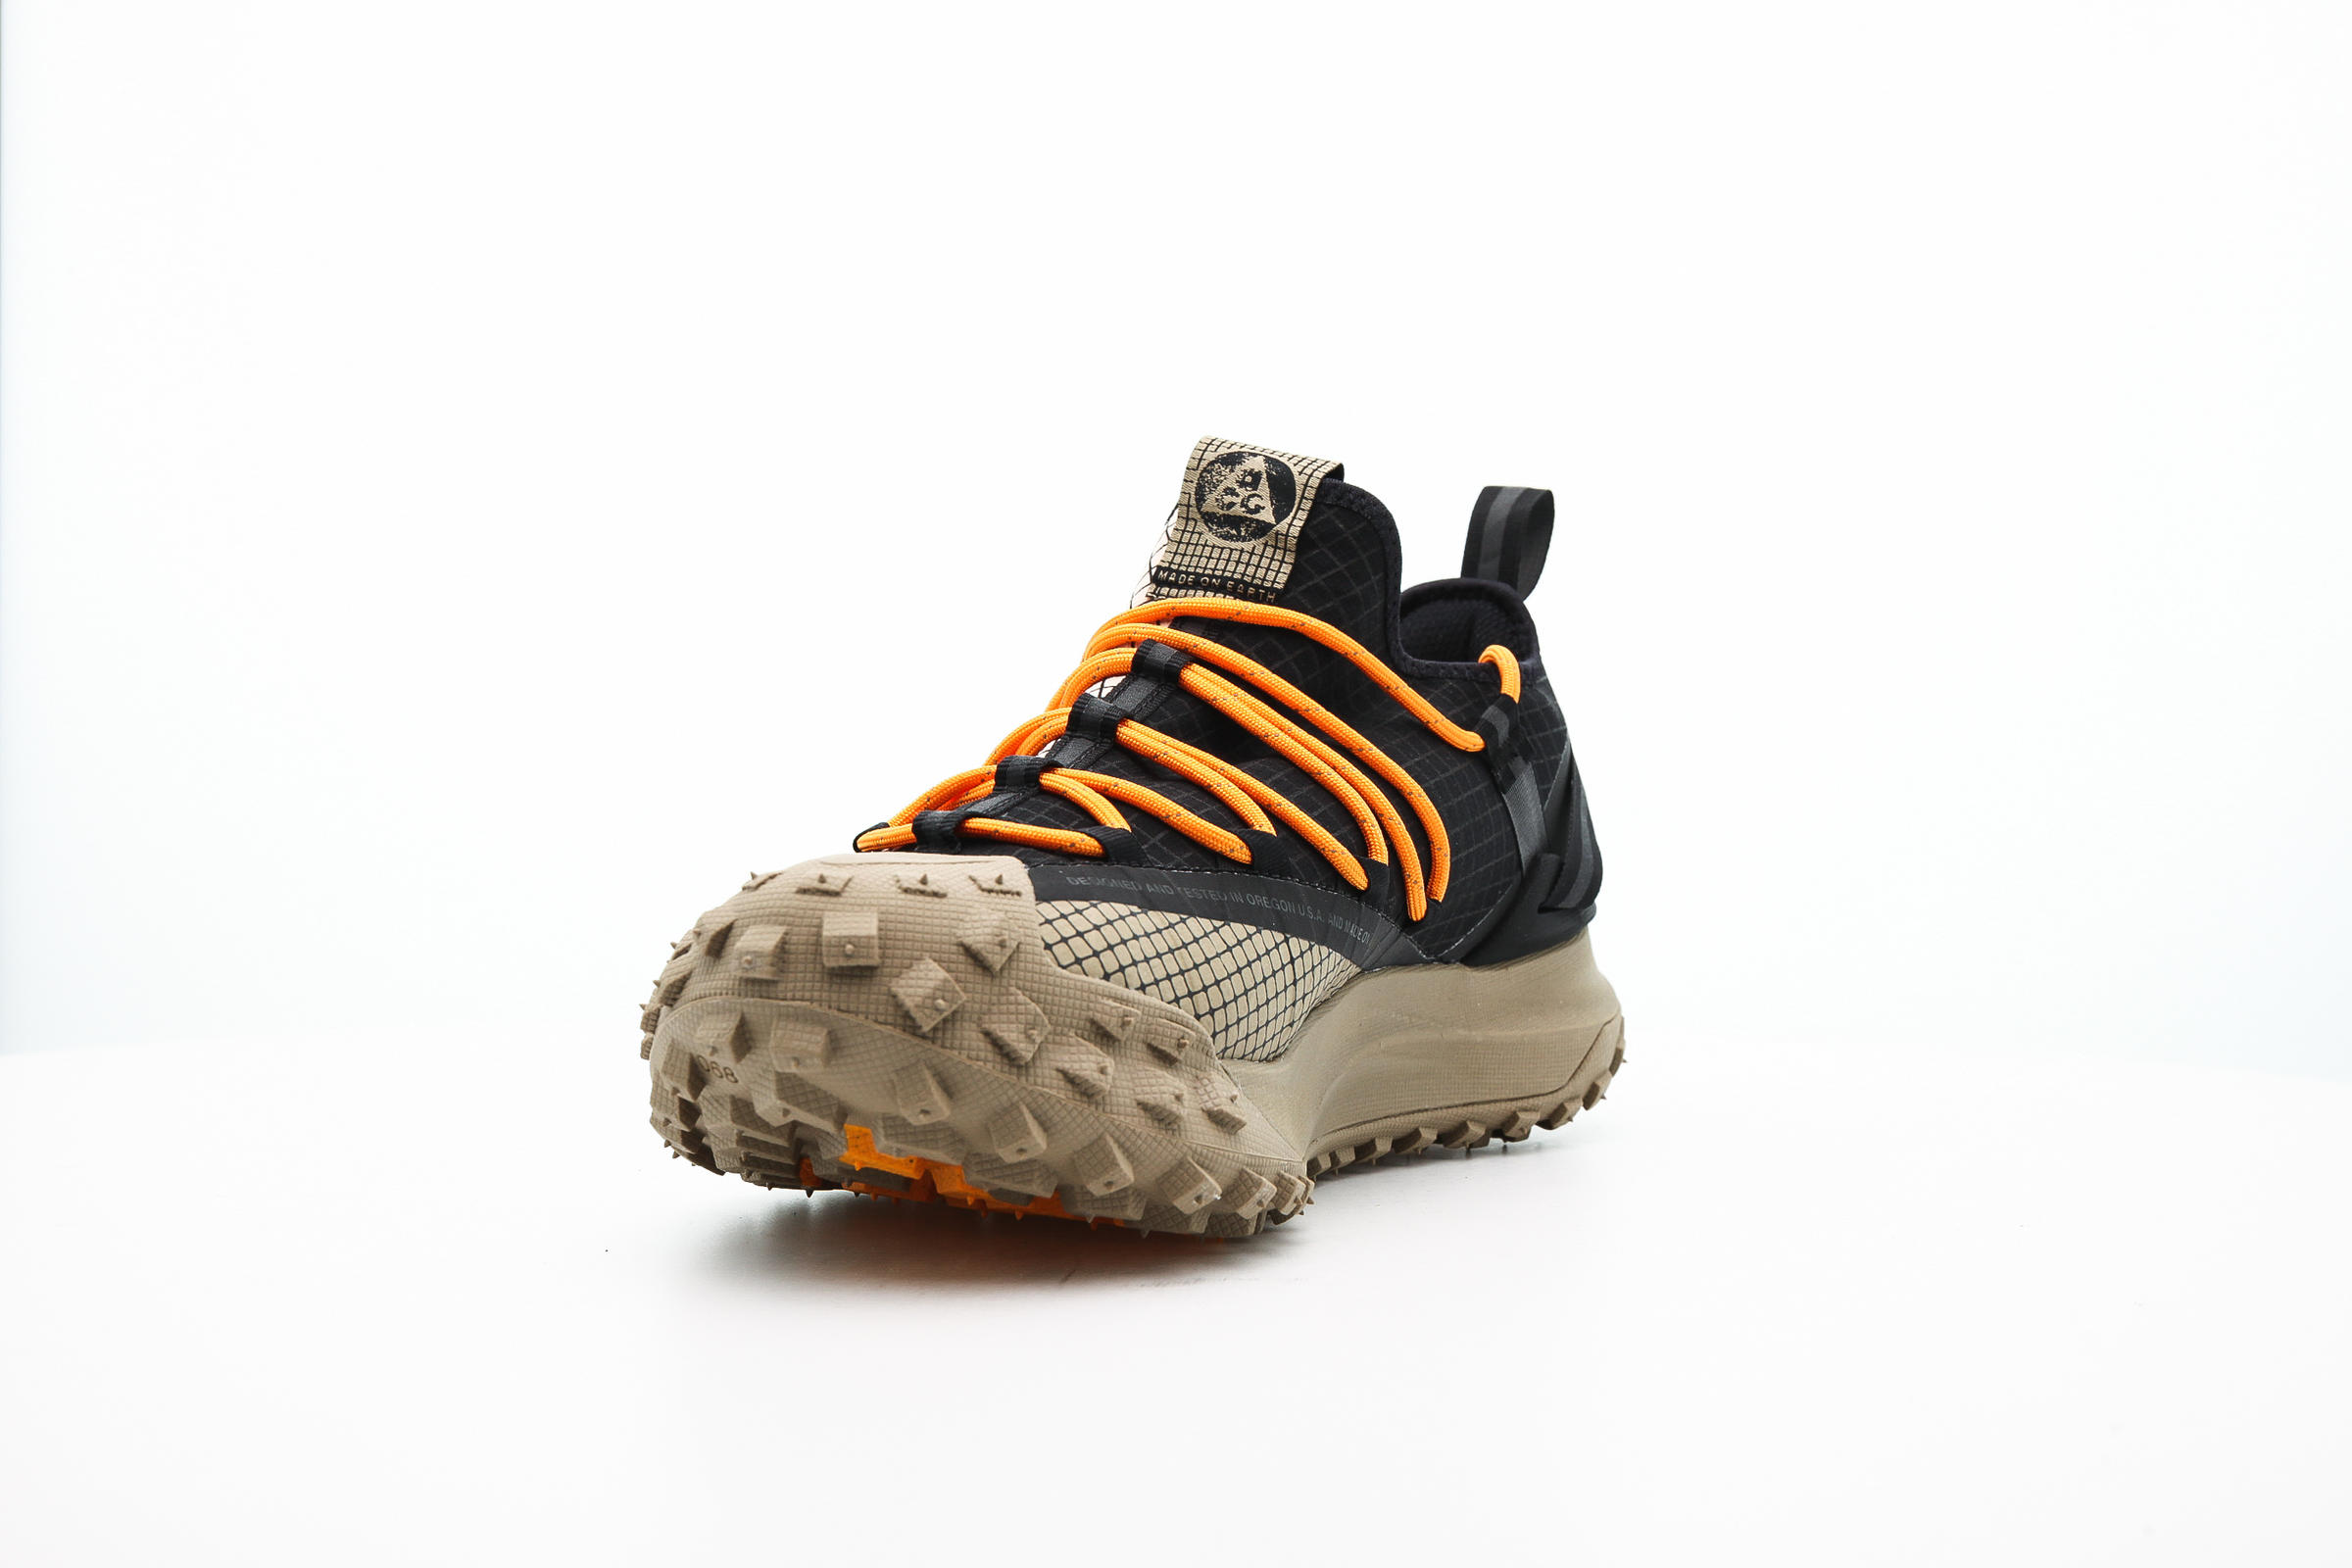 Nike ACG MOUNTAIN FLY LOW "FOSSIL STONE"